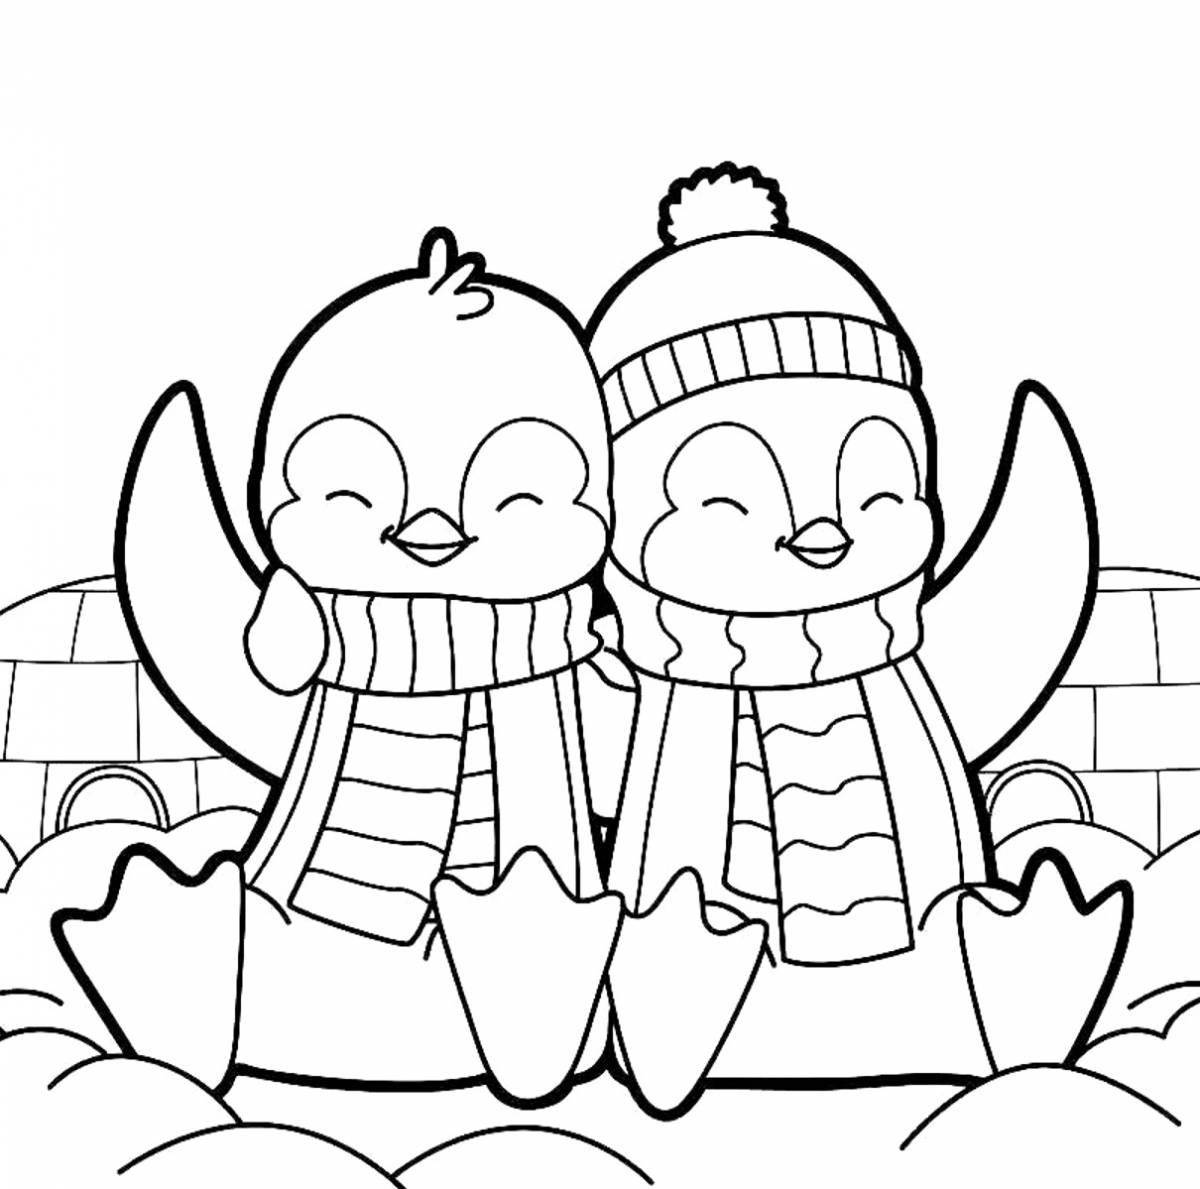 Colorful christmas penguin coloring page